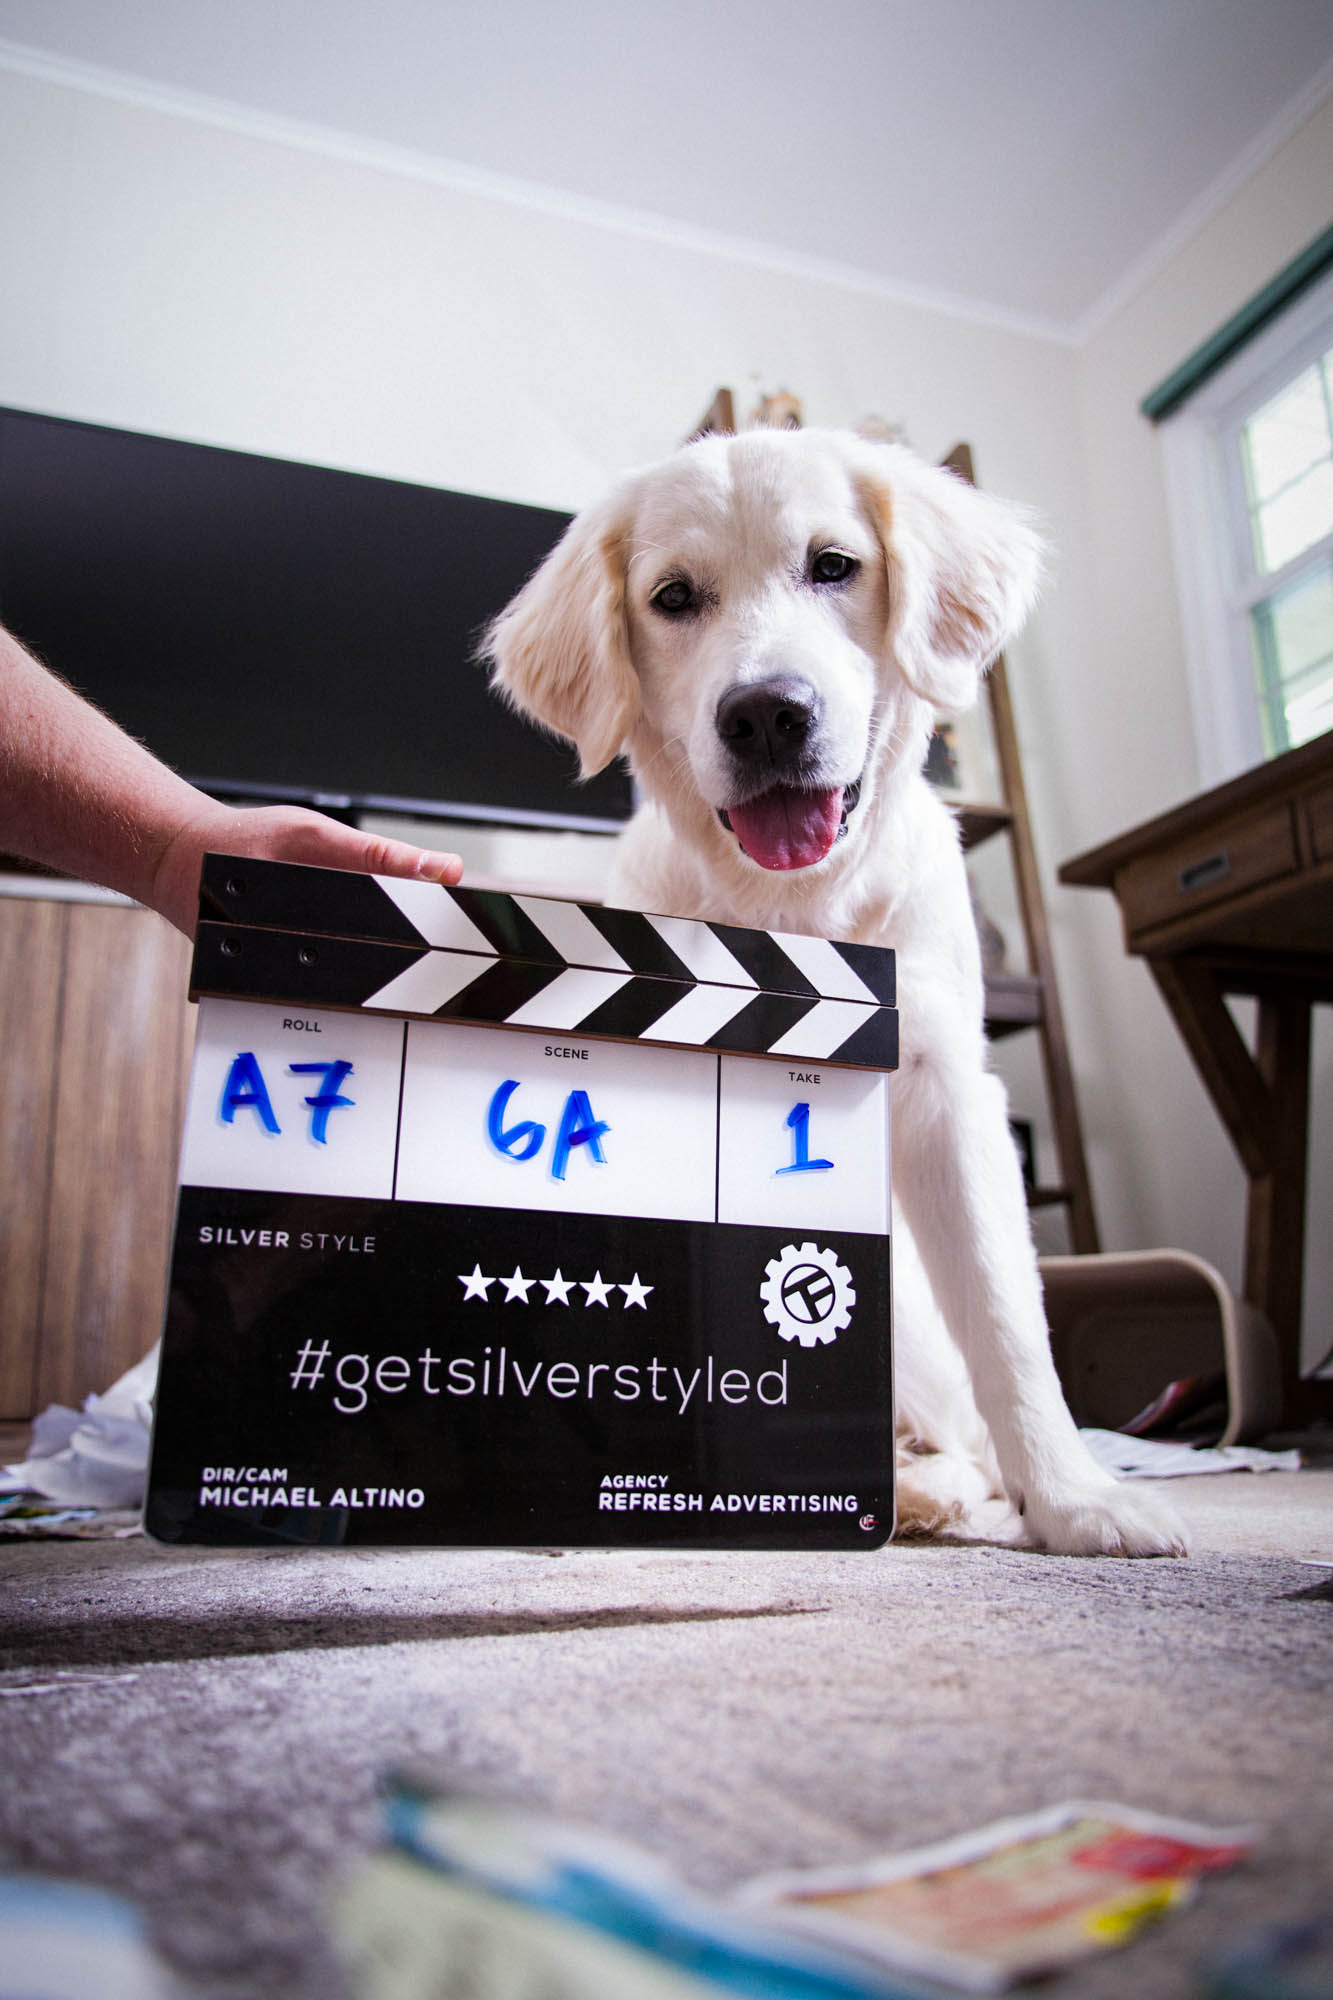 Puppy with film slate on set for commercial video production.